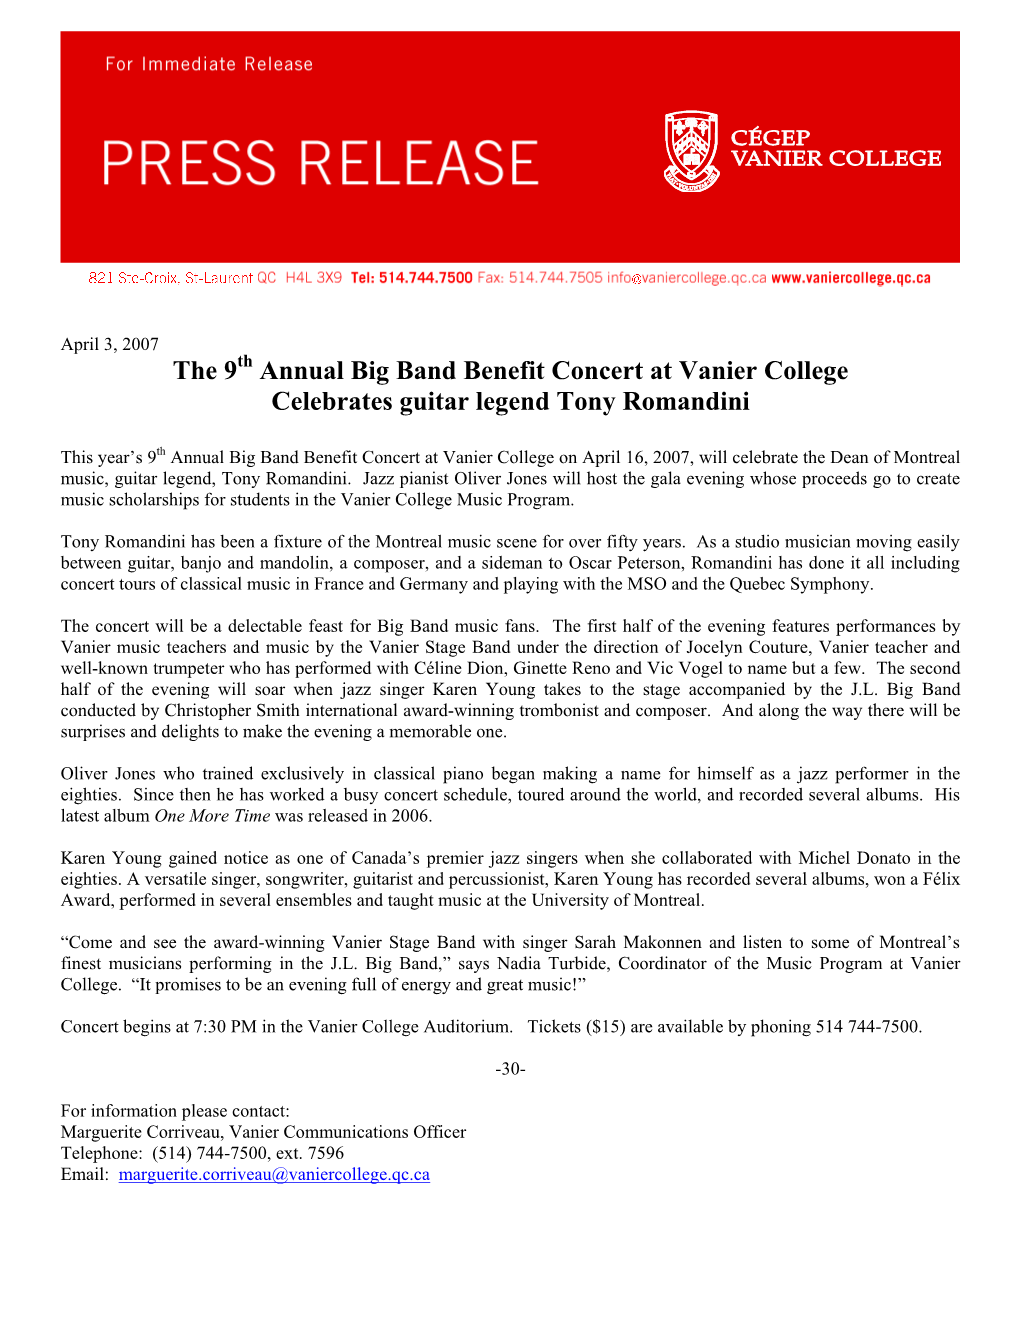 The 9 Annual Big Band Benefit Concert at Vanier College